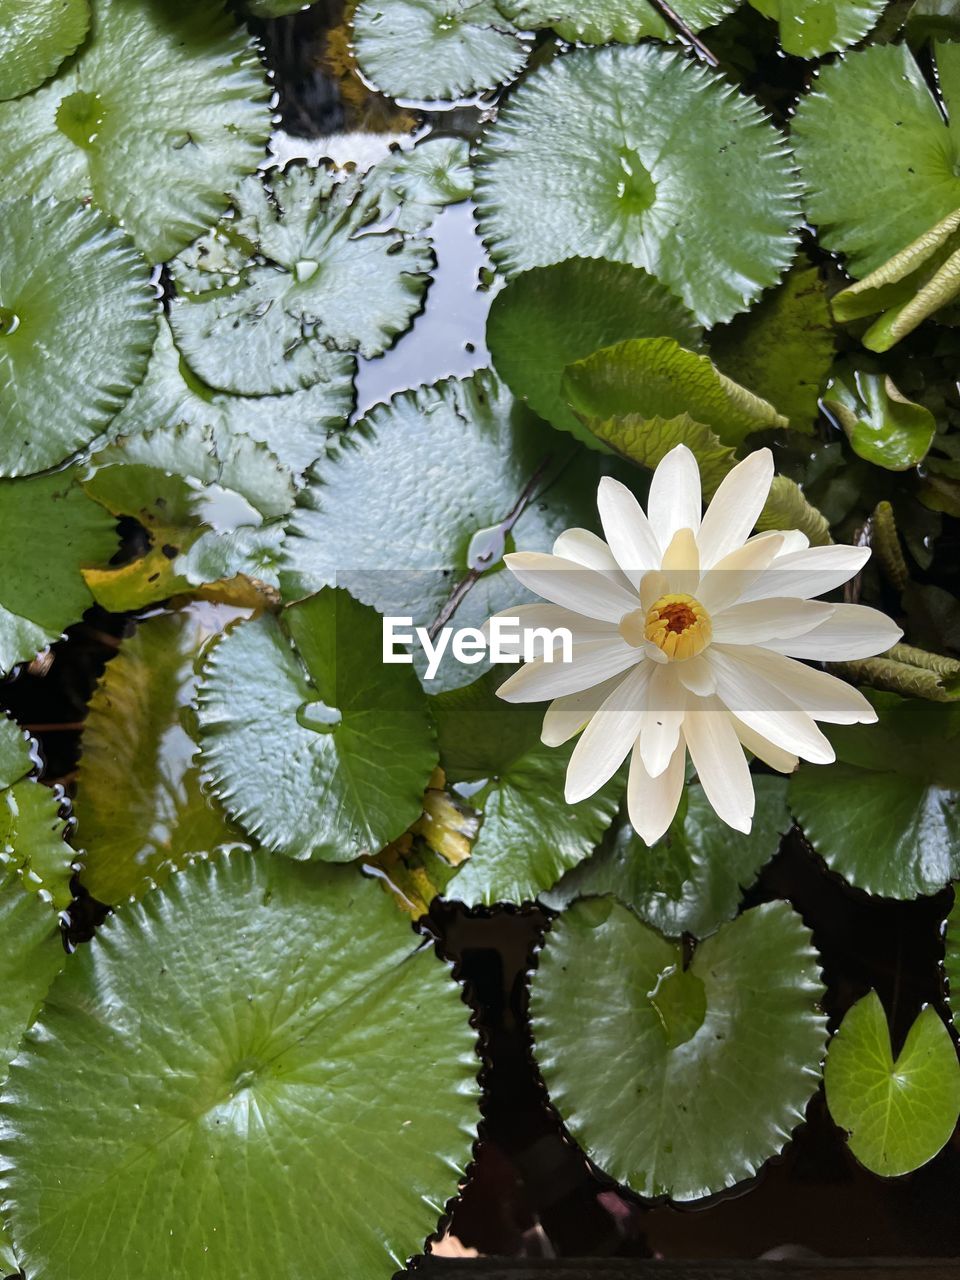 flower, flowering plant, plant, freshness, leaf, beauty in nature, green, plant part, water lily, water, nature, lake, growth, flower head, petal, floating, inflorescence, fragility, floating on water, close-up, no people, aquatic plant, high angle view, lotus water lily, lily, outdoors, botany, day, white, tranquility, pollen, springtime